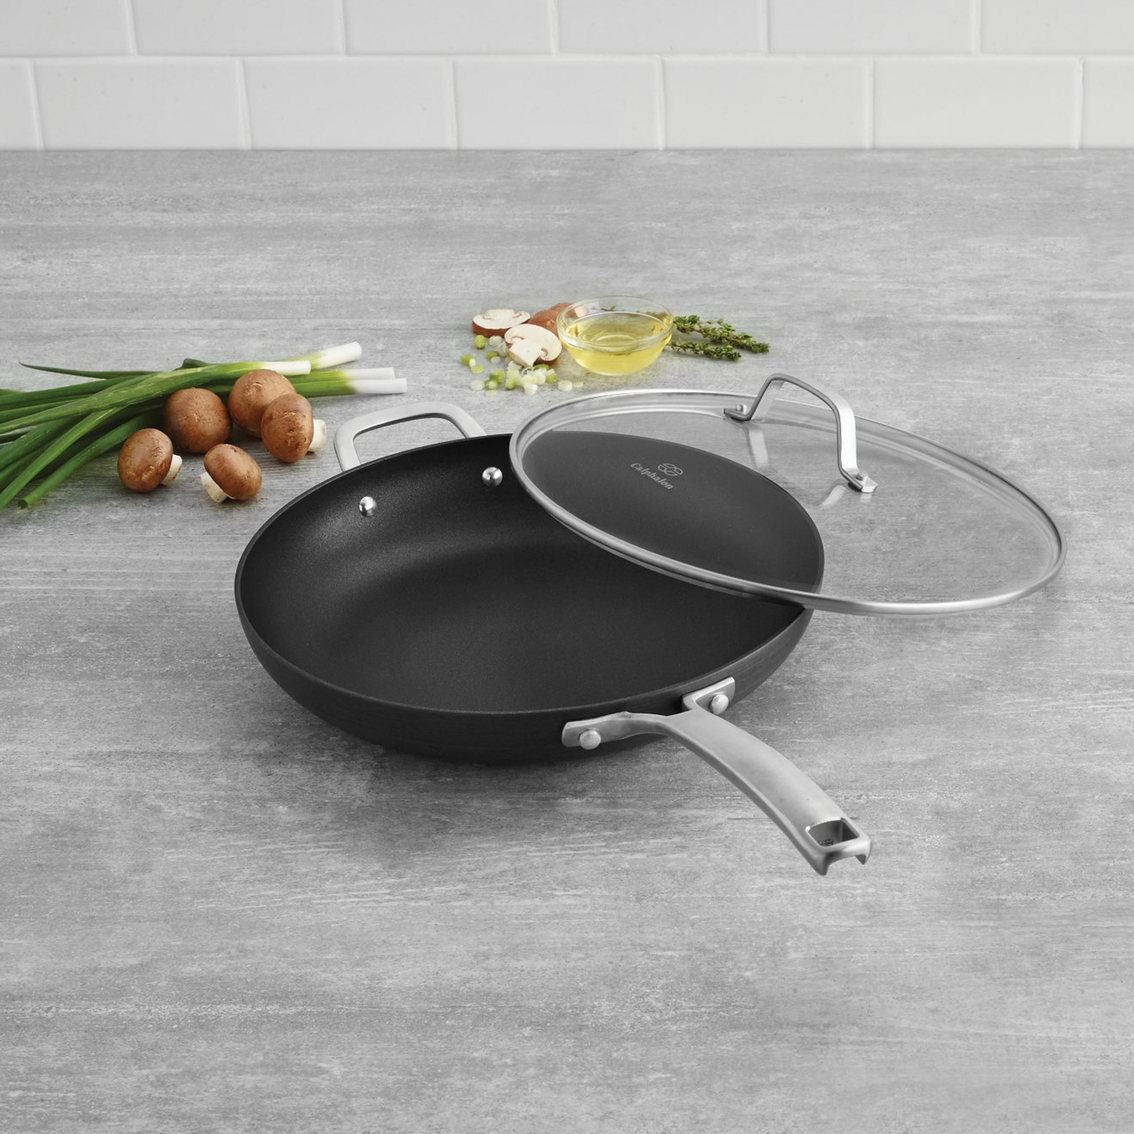 calphalon classic calphalon 10 inch fry pan and cover Review